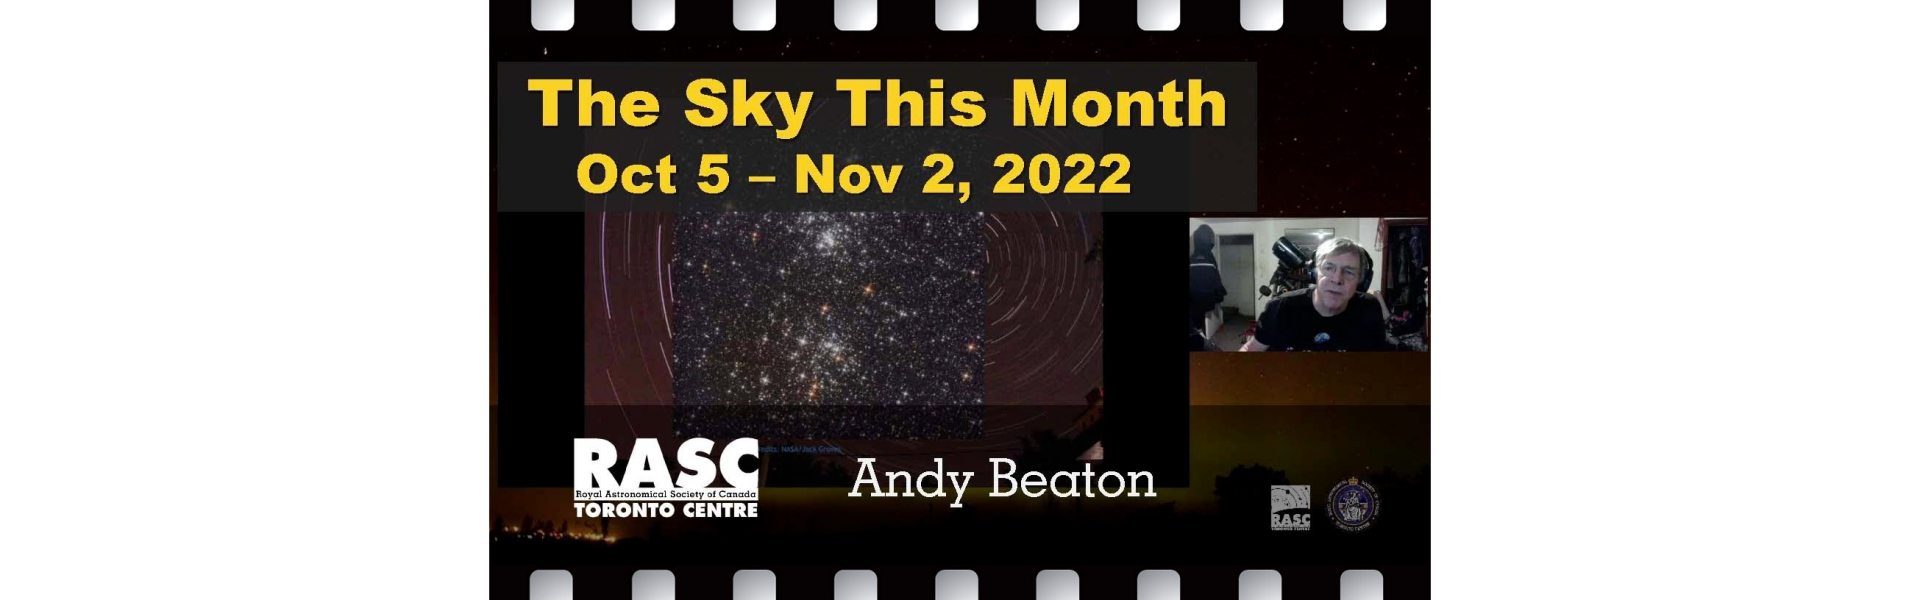 The Sky This Month Oct 5 - Nov 2, 2022